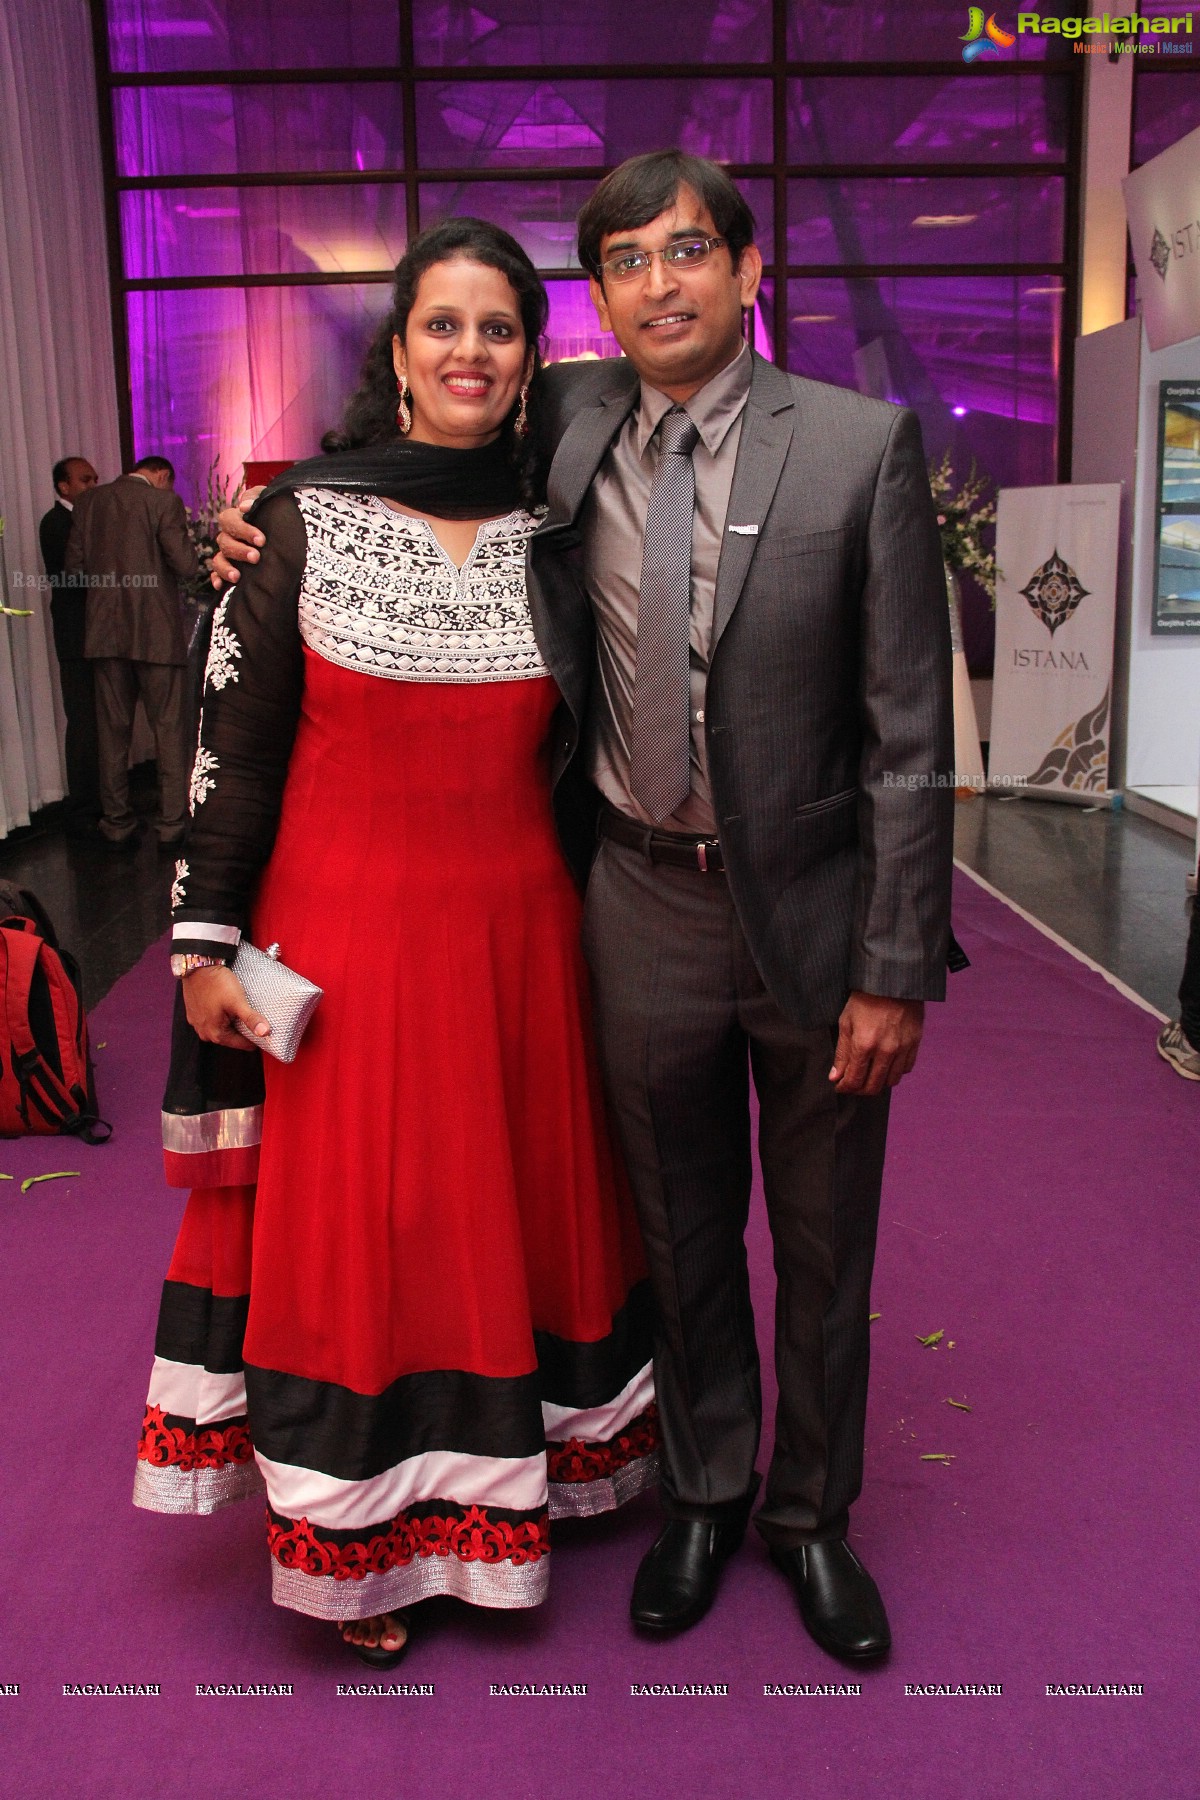 Project 511: Food For Change - A Black Tie Dinner For The Who's Who at N Convention, Hyderabad